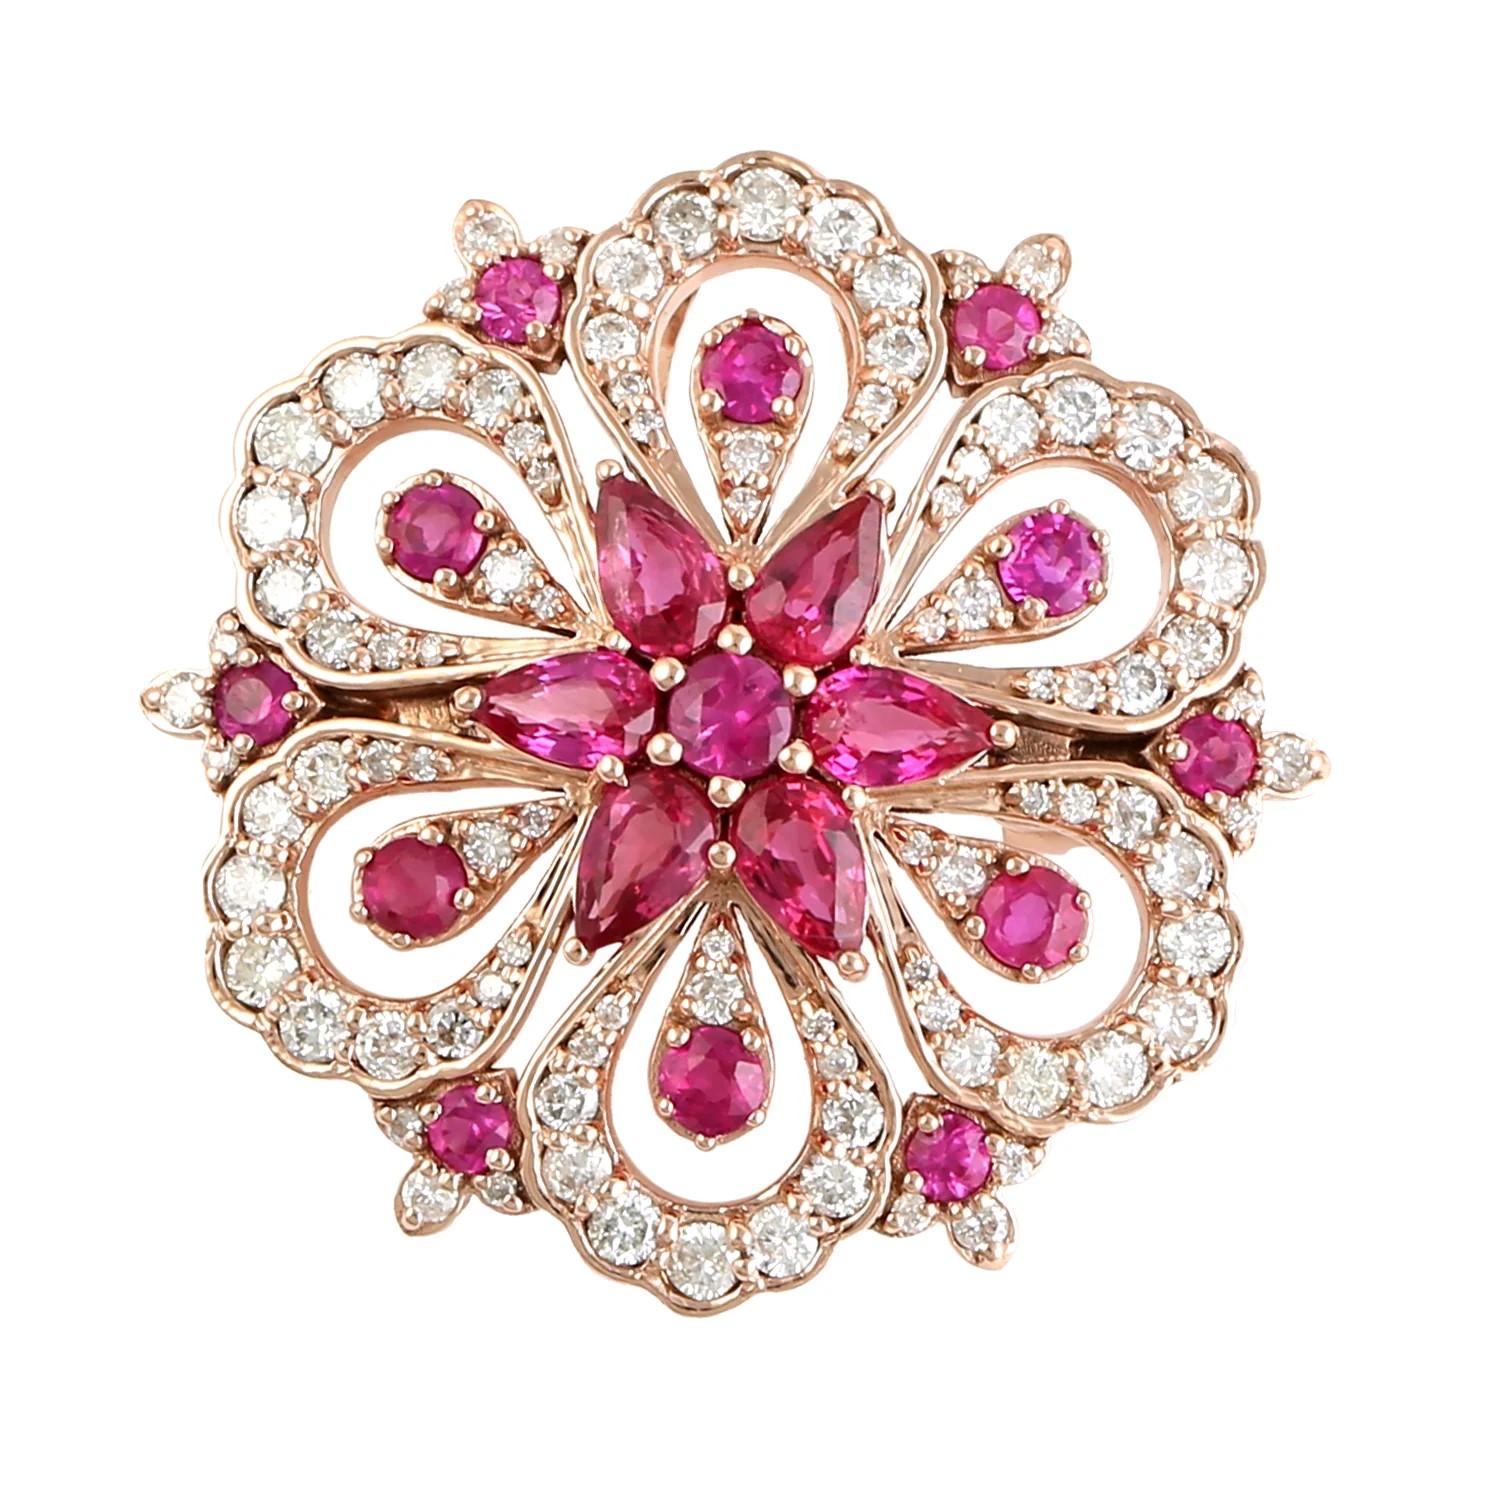 Mixed Cut Meghna Jewels 2.94 carats ruby diamond 14K Gold Floral Pendant Brooch For Sale